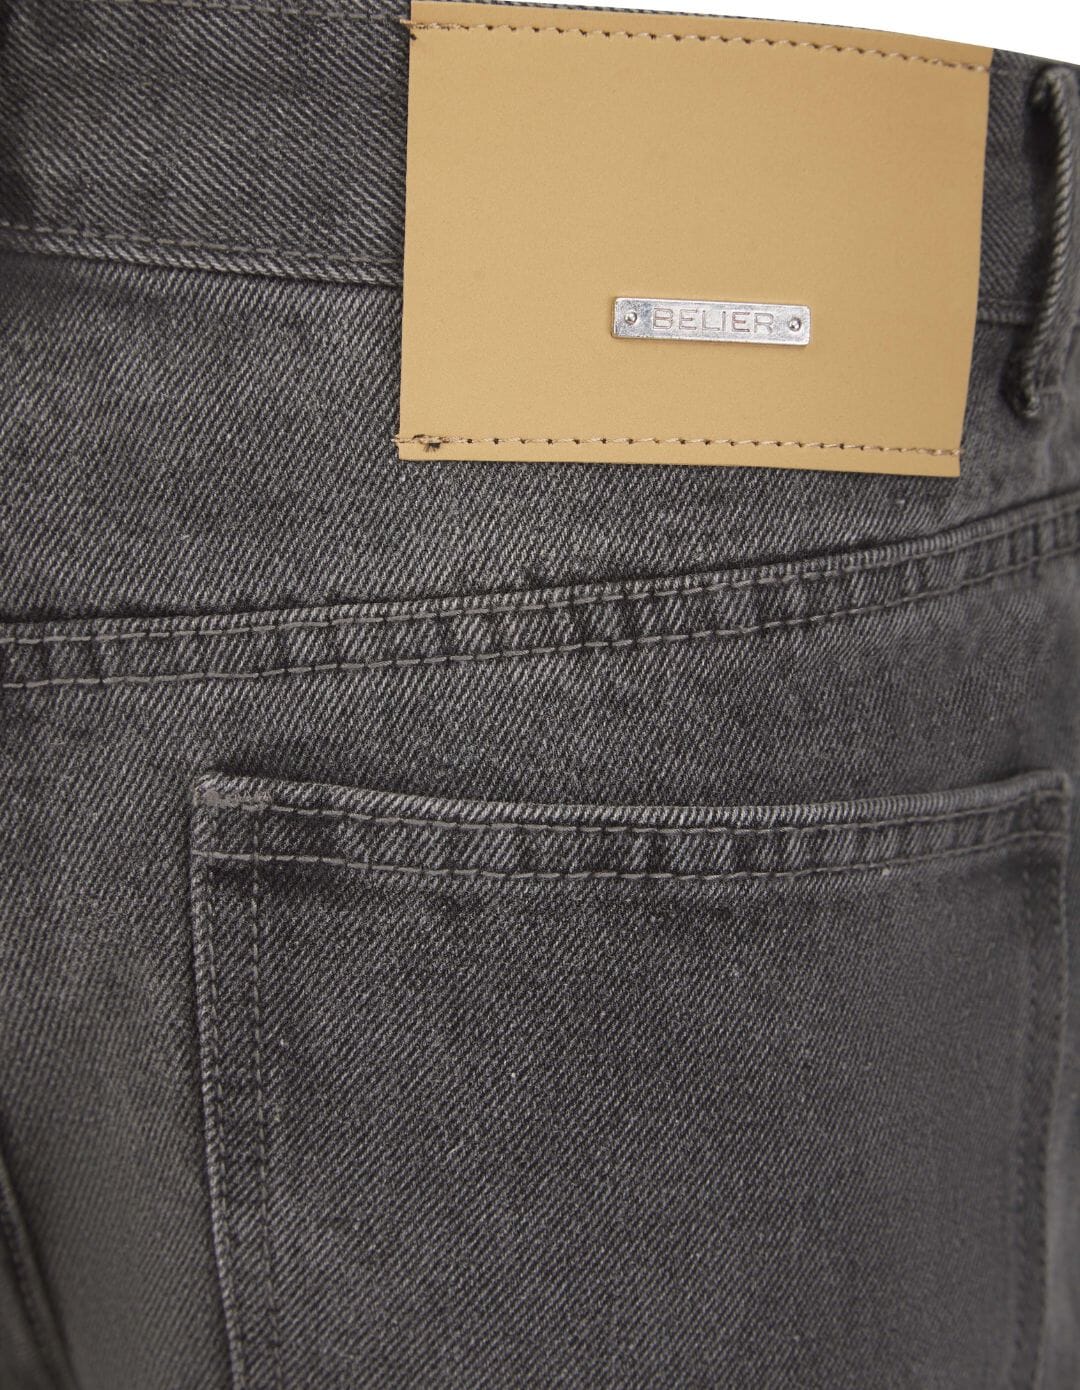 Washed Grey Straight Leg Jeans